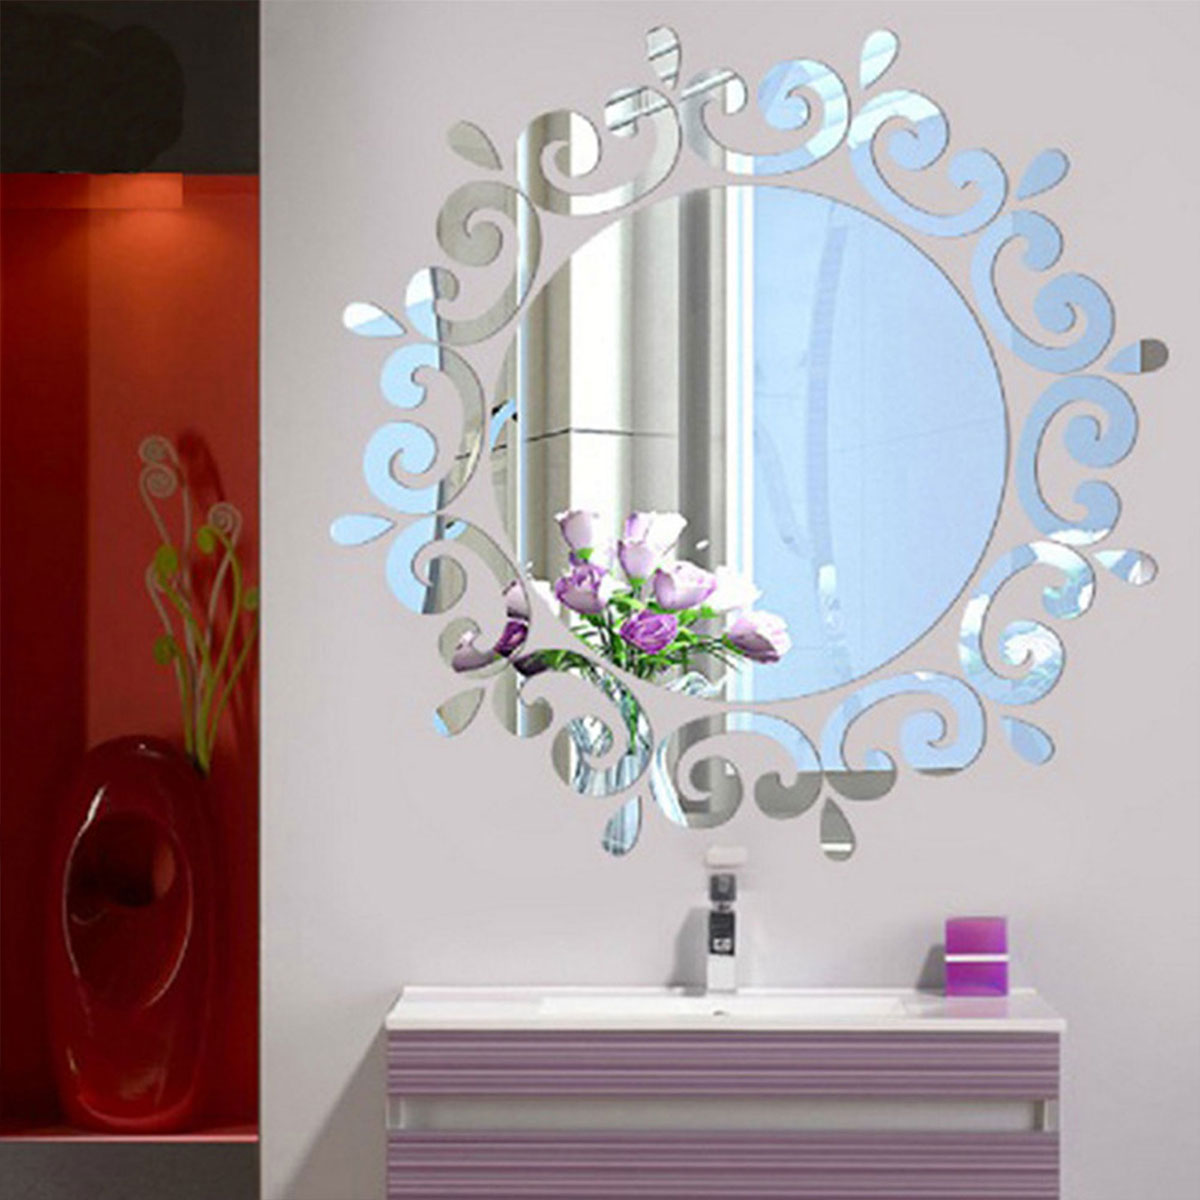 57C8 Silver Gold Wall Stickers 3D Mirror Home Decor Contemporary Wall Decal 